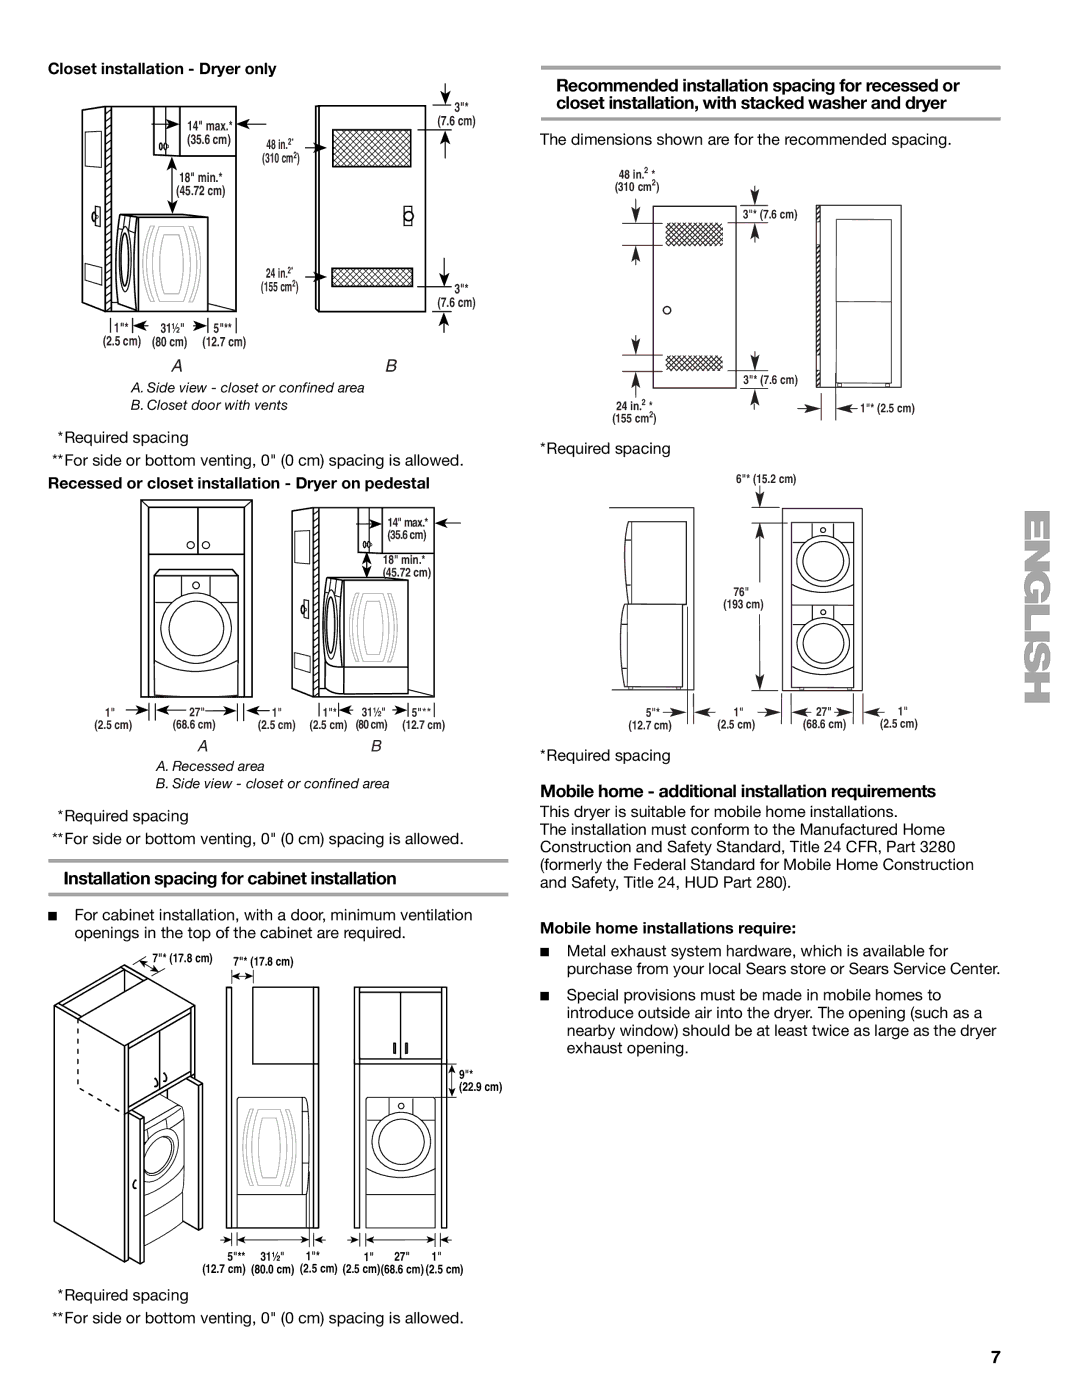 Kenmore 110.8708, 110.8709 Installation spacing for cabinet installation, Mobile home additional installation requirements 